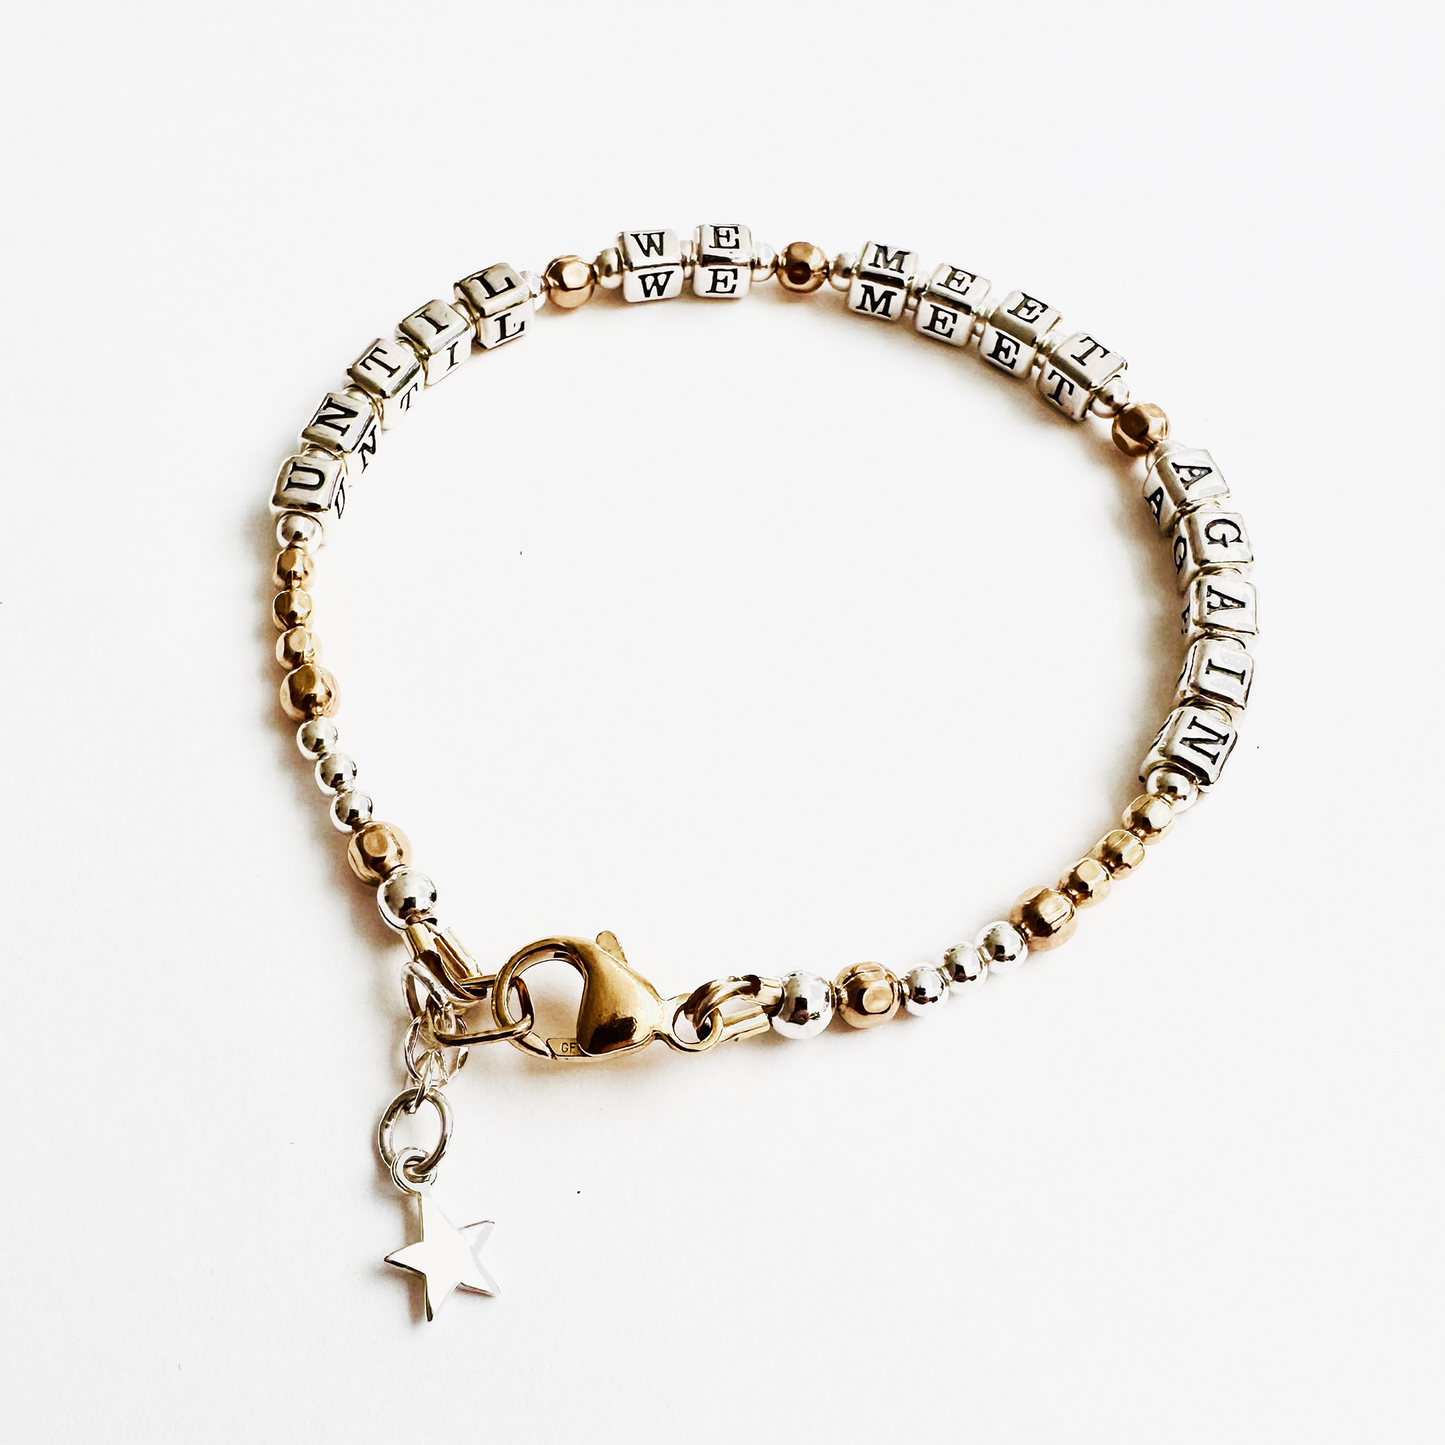 Sympathy or Grief Gift Bracelet says "Until We Meet Again" in sterling silver and gold., with a sterling silver charm detail